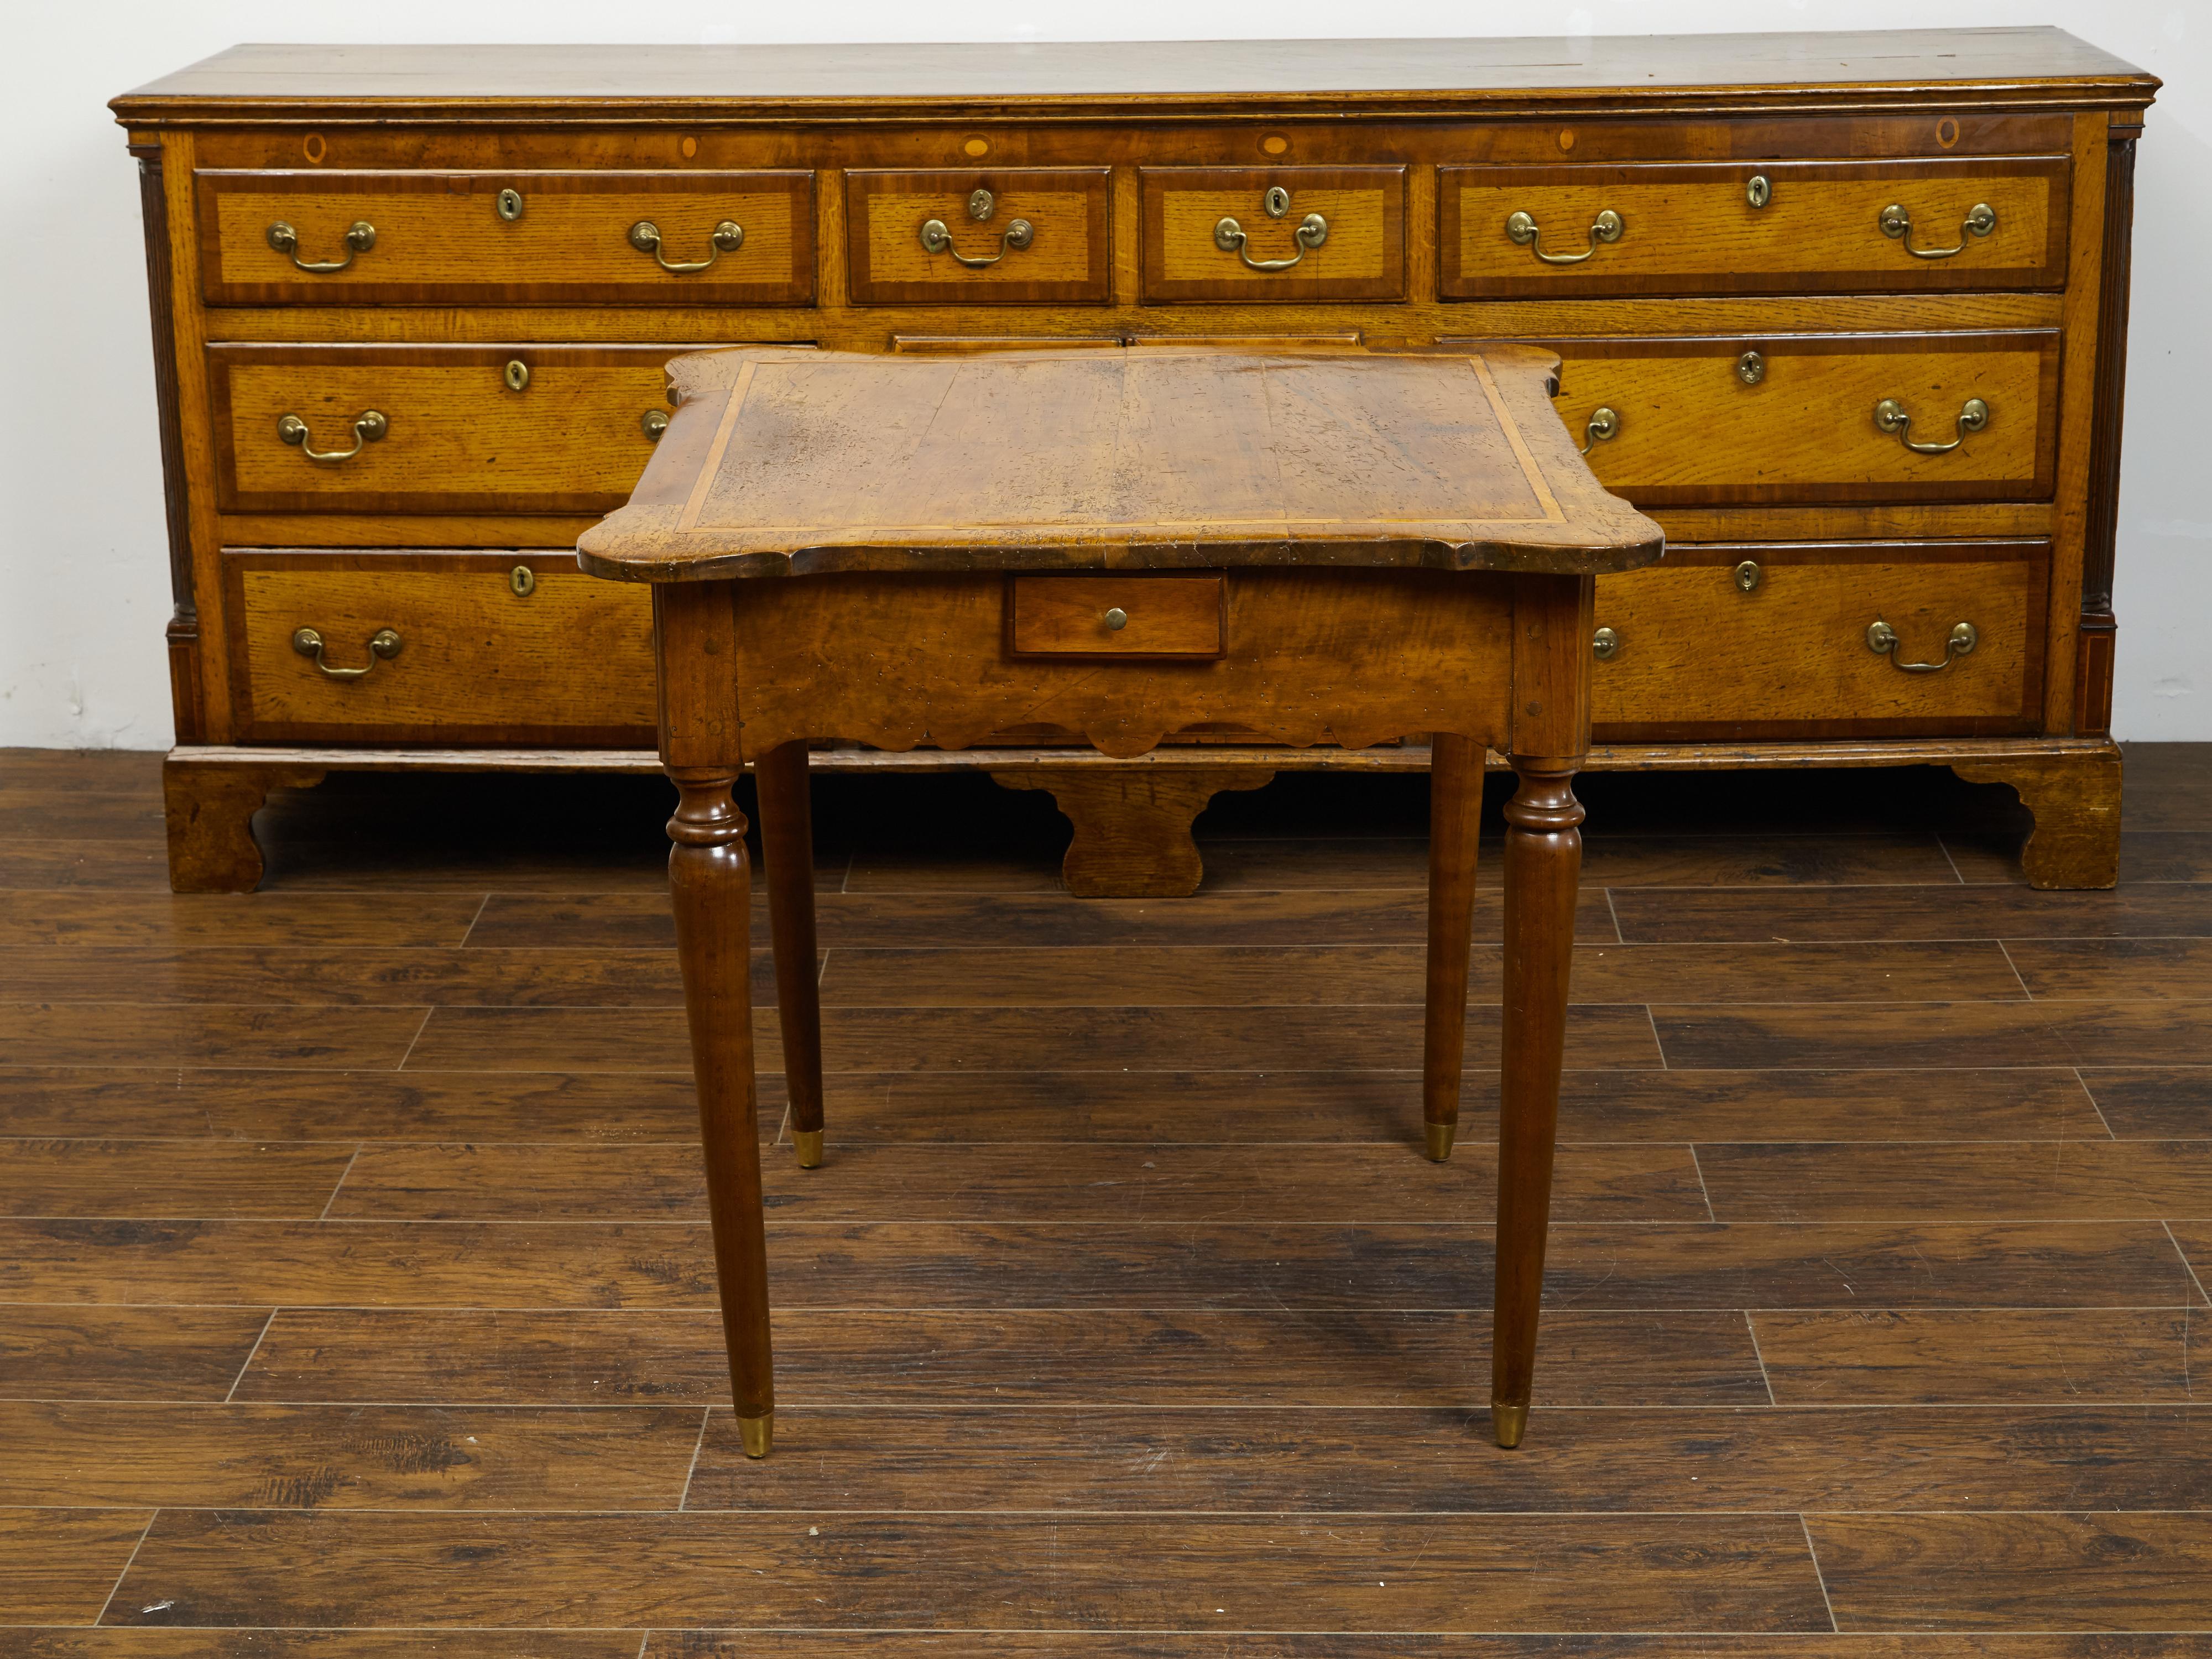 A French walnut table from the early 19th century, with banding, four small drawers and carved apron. Created in France during the early years of the 19th century, this walnut table features a shaped planked top with rounded corners and banding,